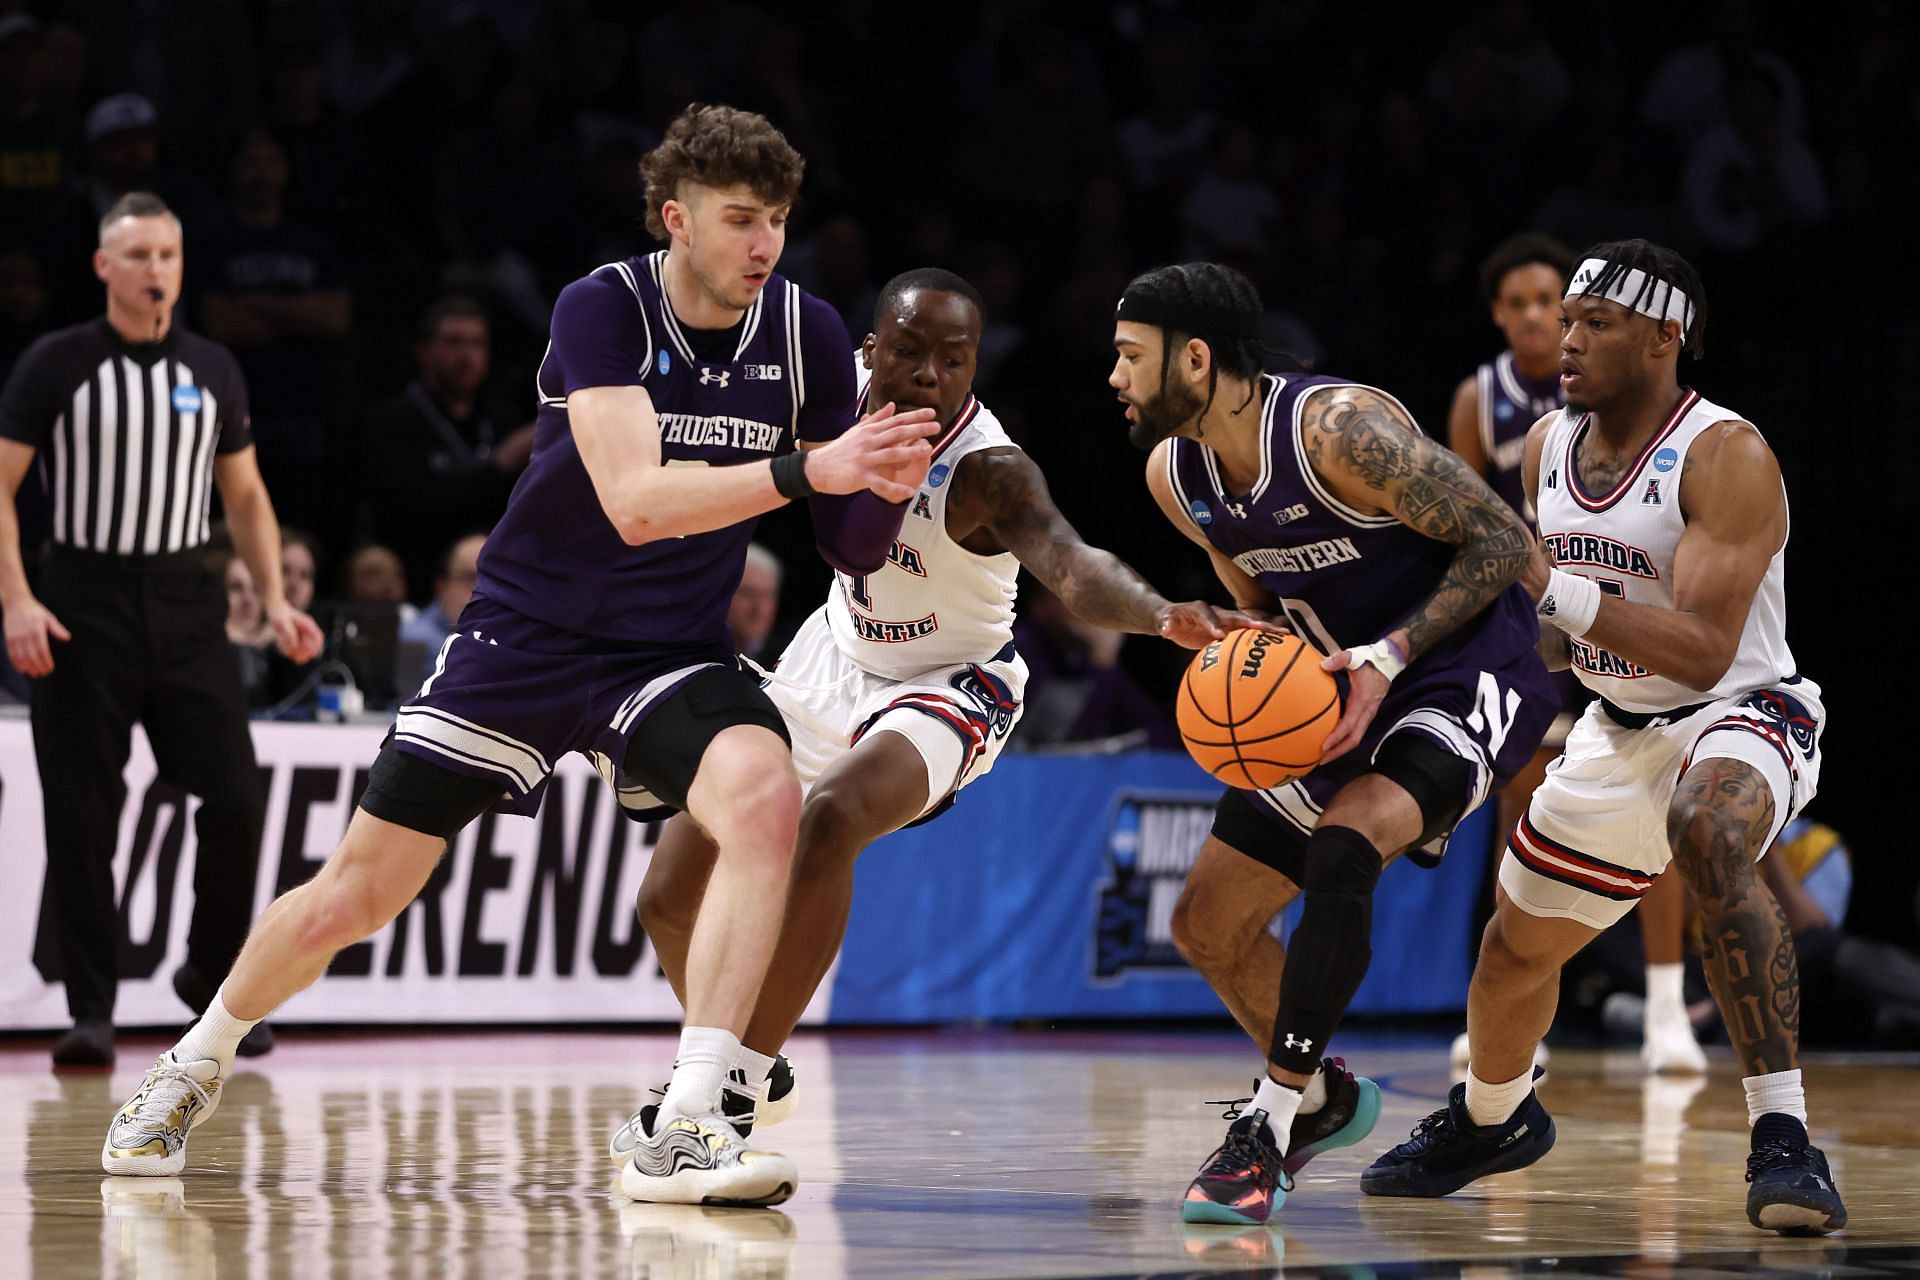 Northwestern defeated Florida Atlantic in overtime 77-65 in the first round of March Madness.